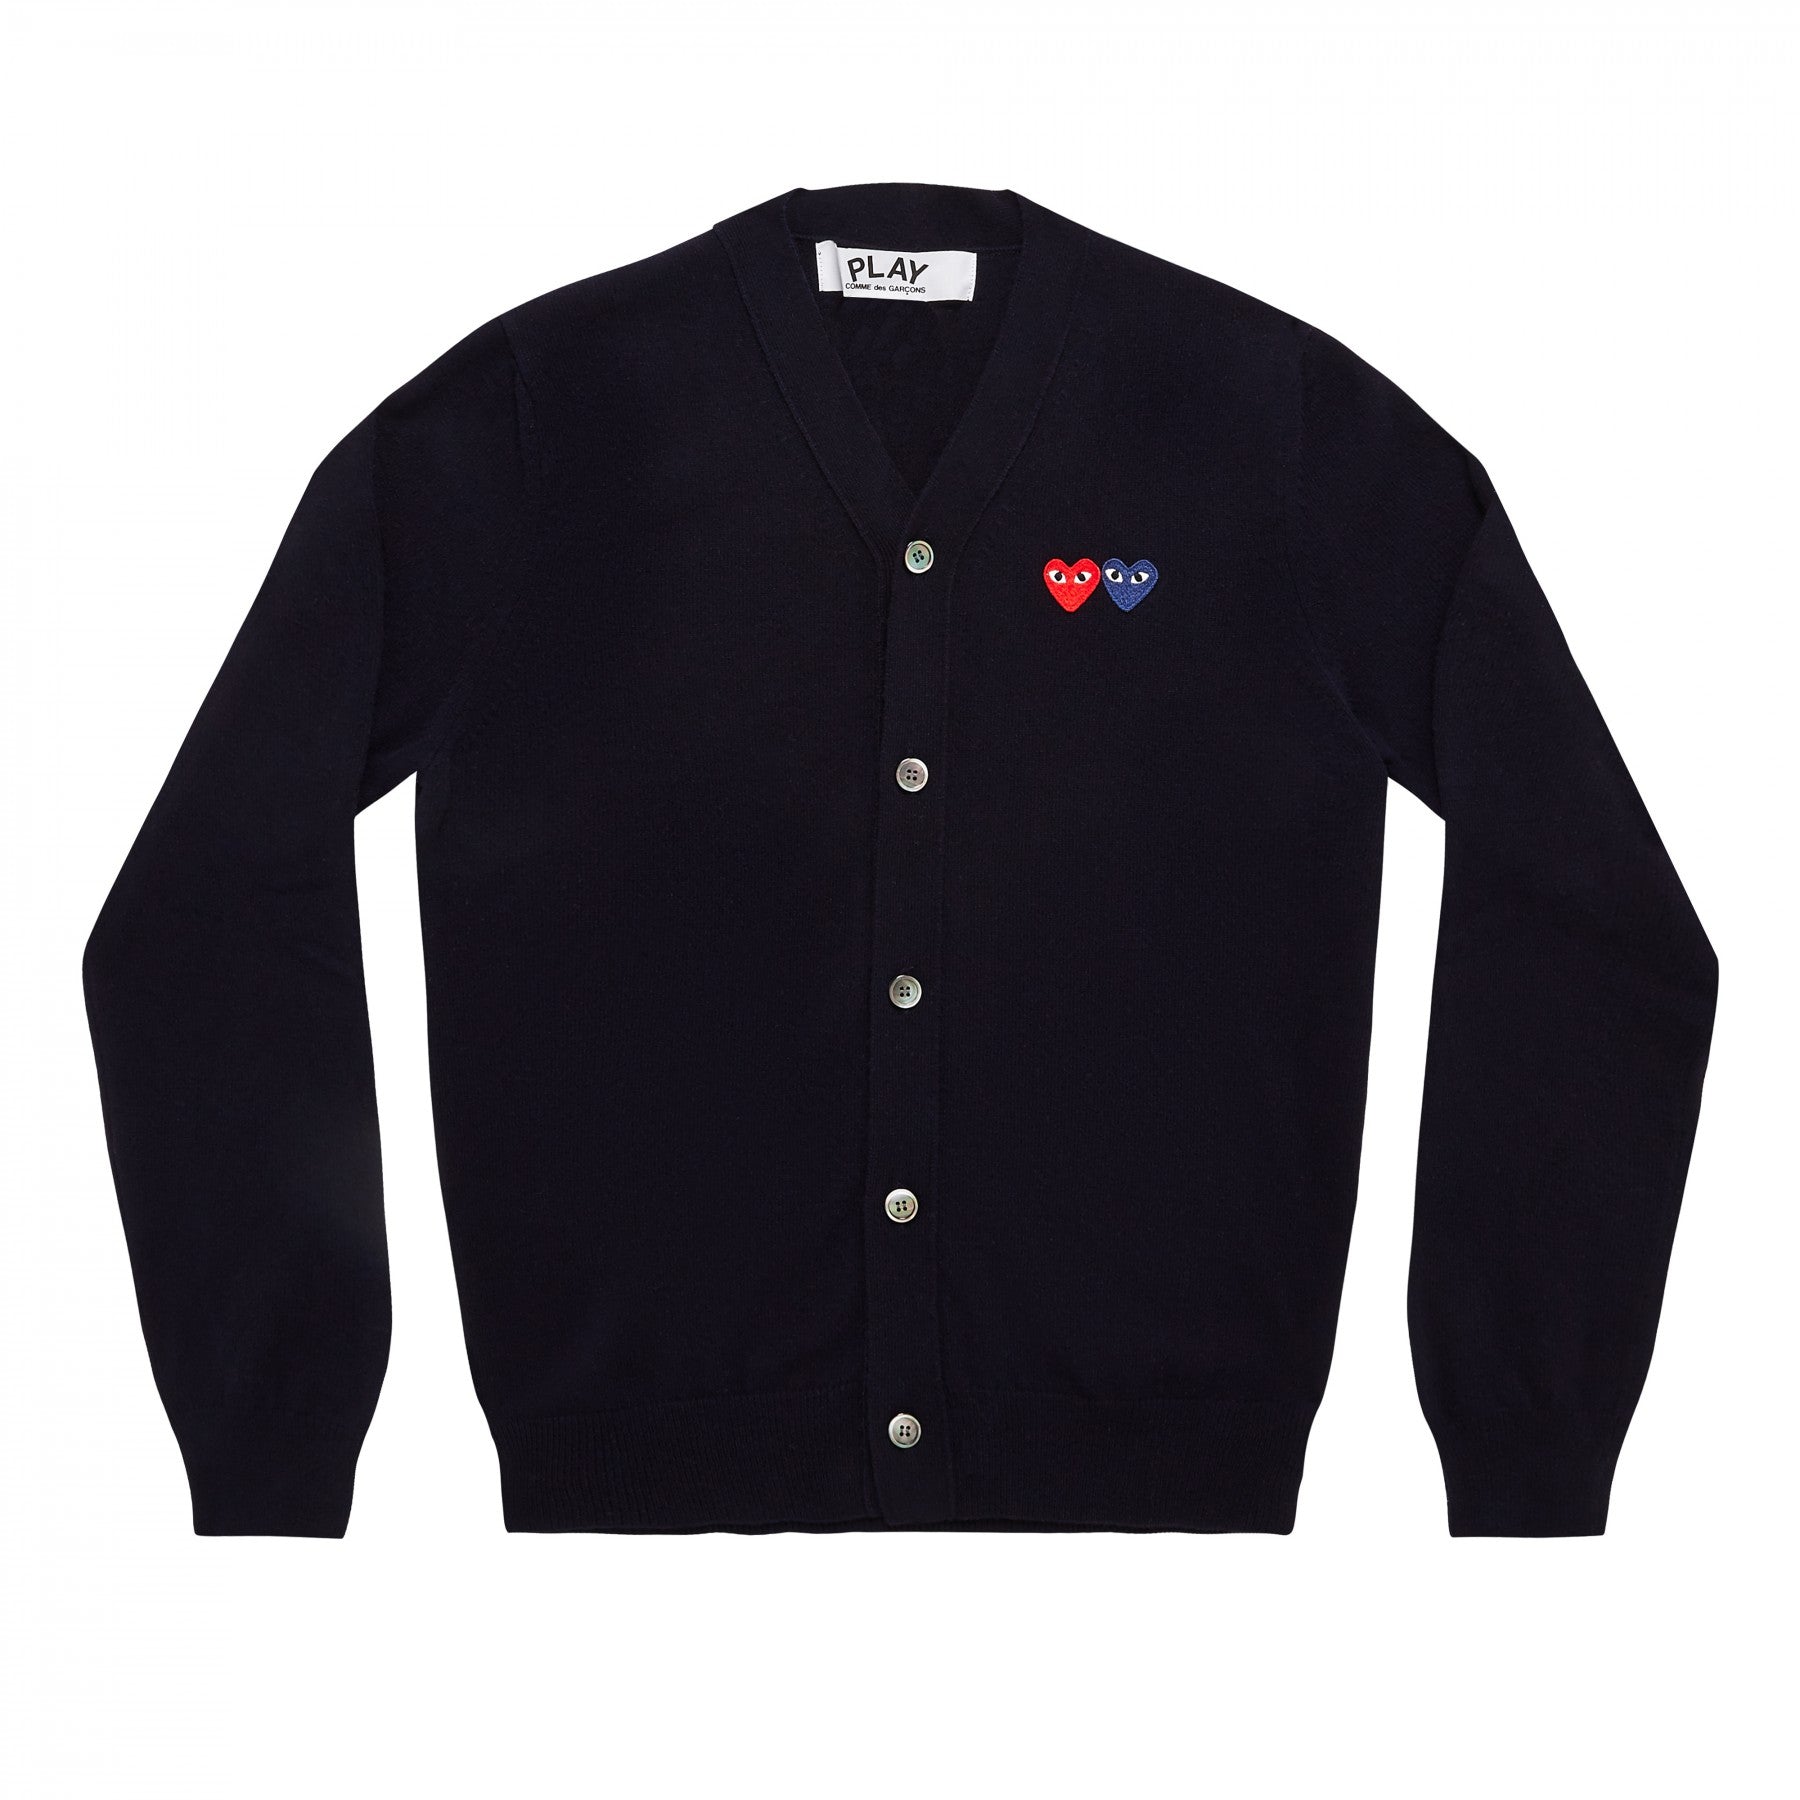 PLAY Men's Cardigan with Double Emblems Navy